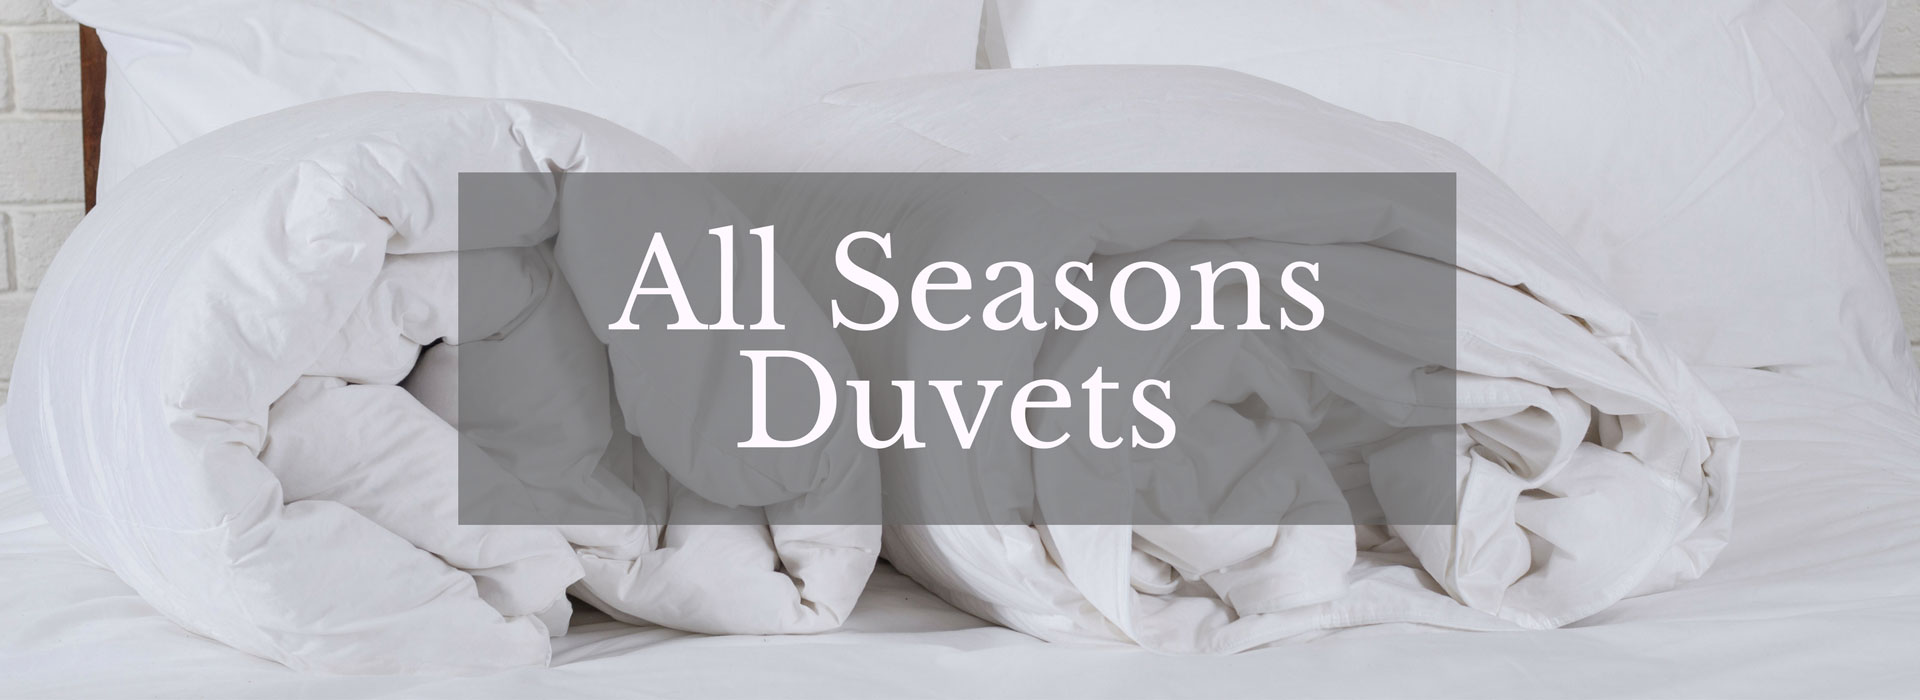 What Is An All Seasons Duvet Homescapes